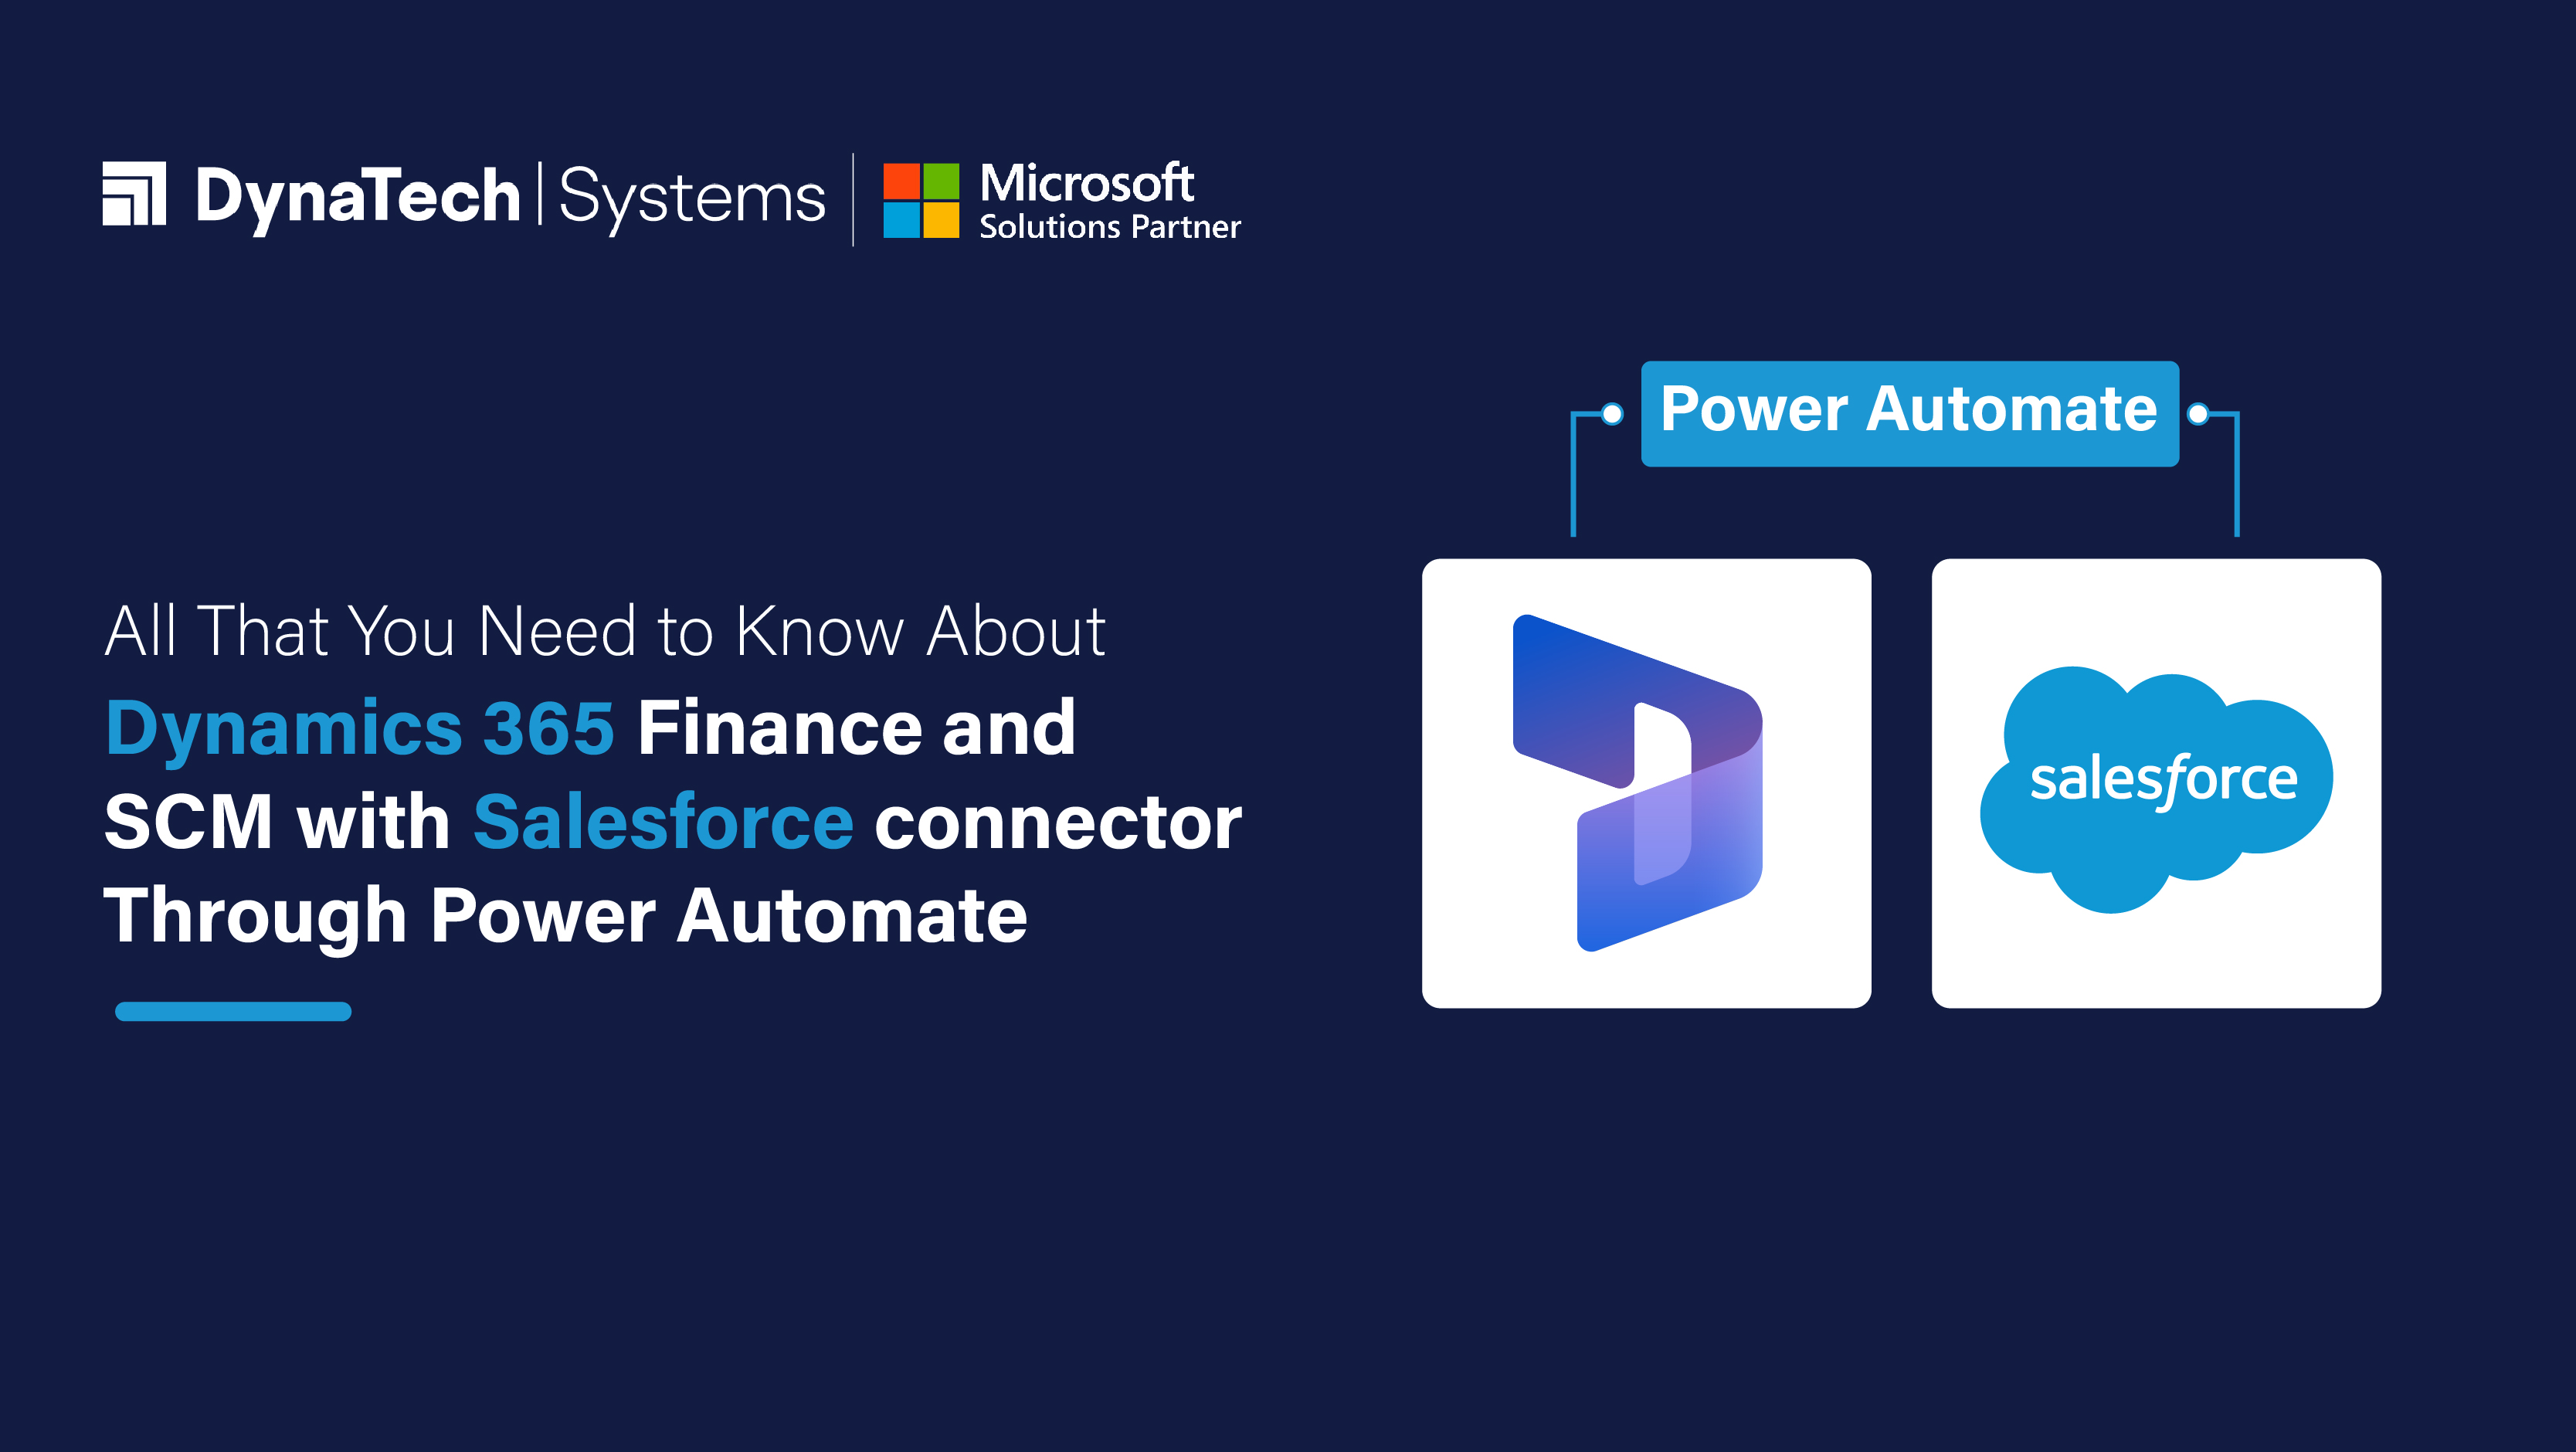 All That You Need to Know About Dynamics 365 Finance and SCM with Salesforce Connector Through Power Automate